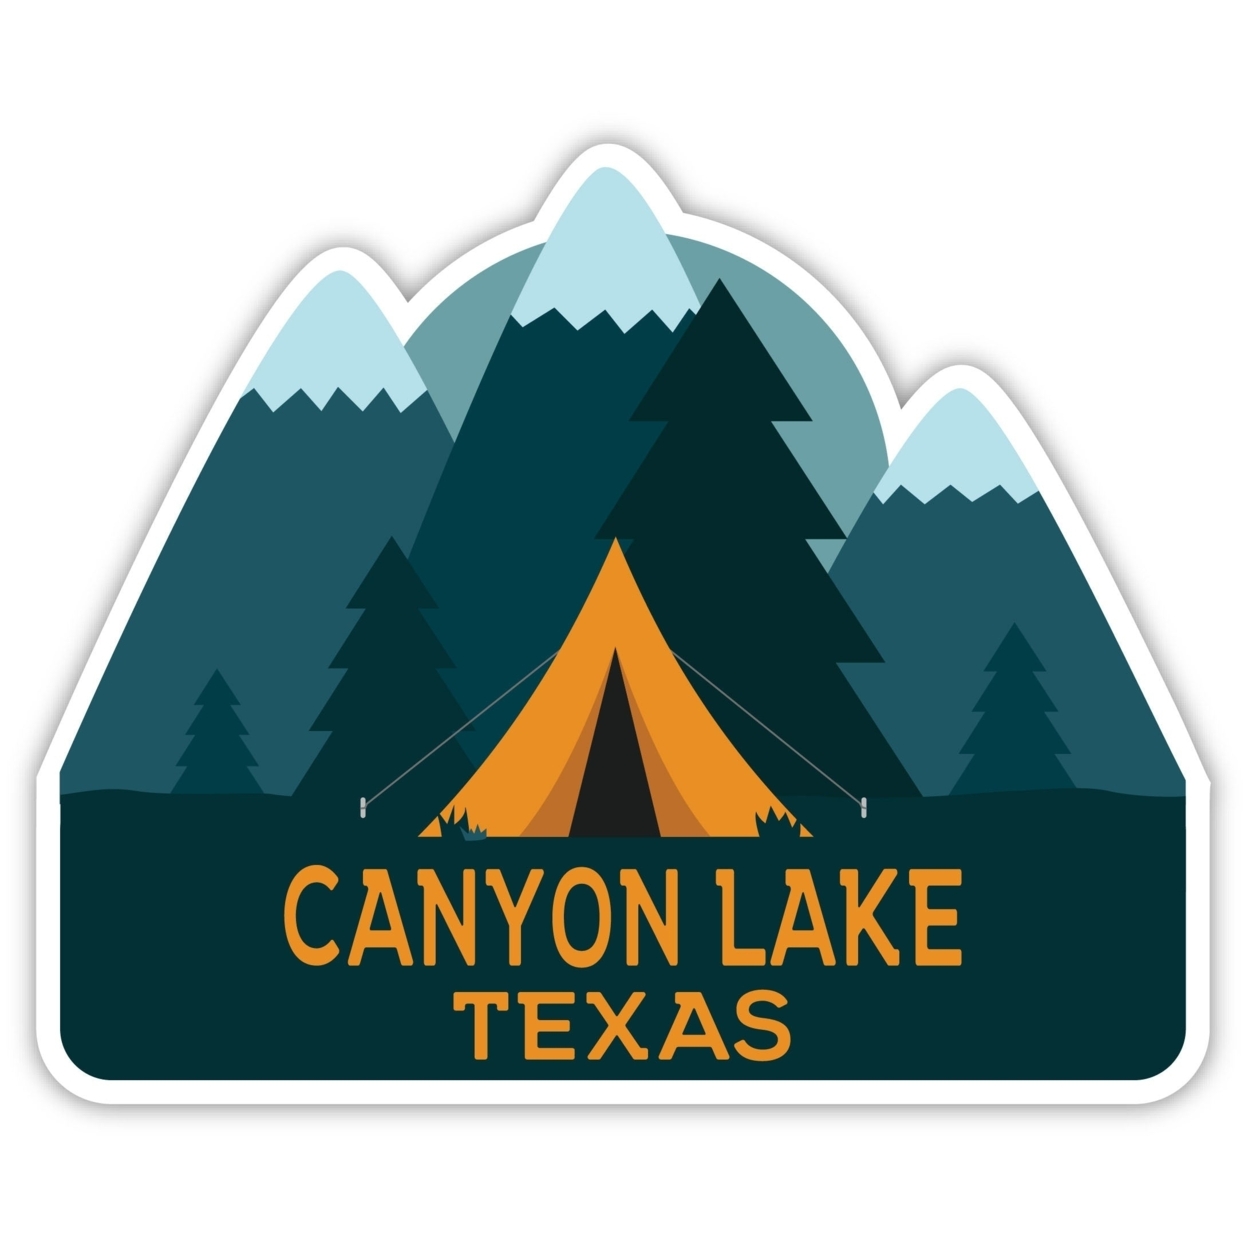 Canyon Lake Texas Souvenir Decorative Stickers (Choose Theme And Size) - 4-Pack, 4-Inch, Camp Life